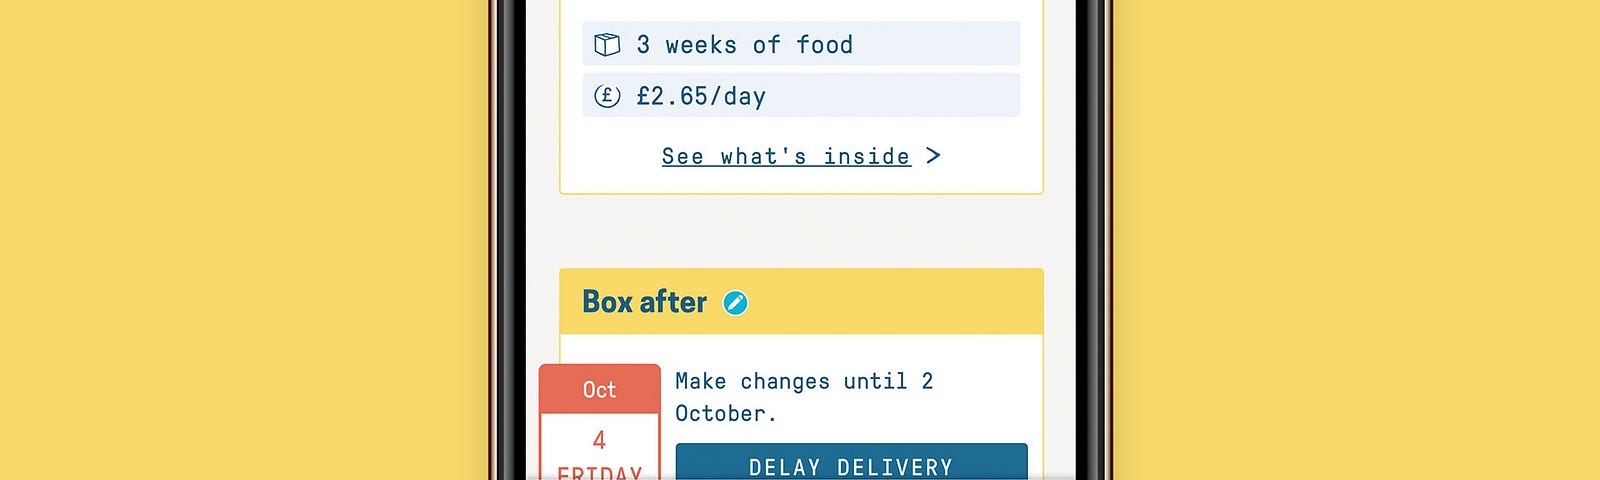 How the Butternut Box in account navigation looks today.